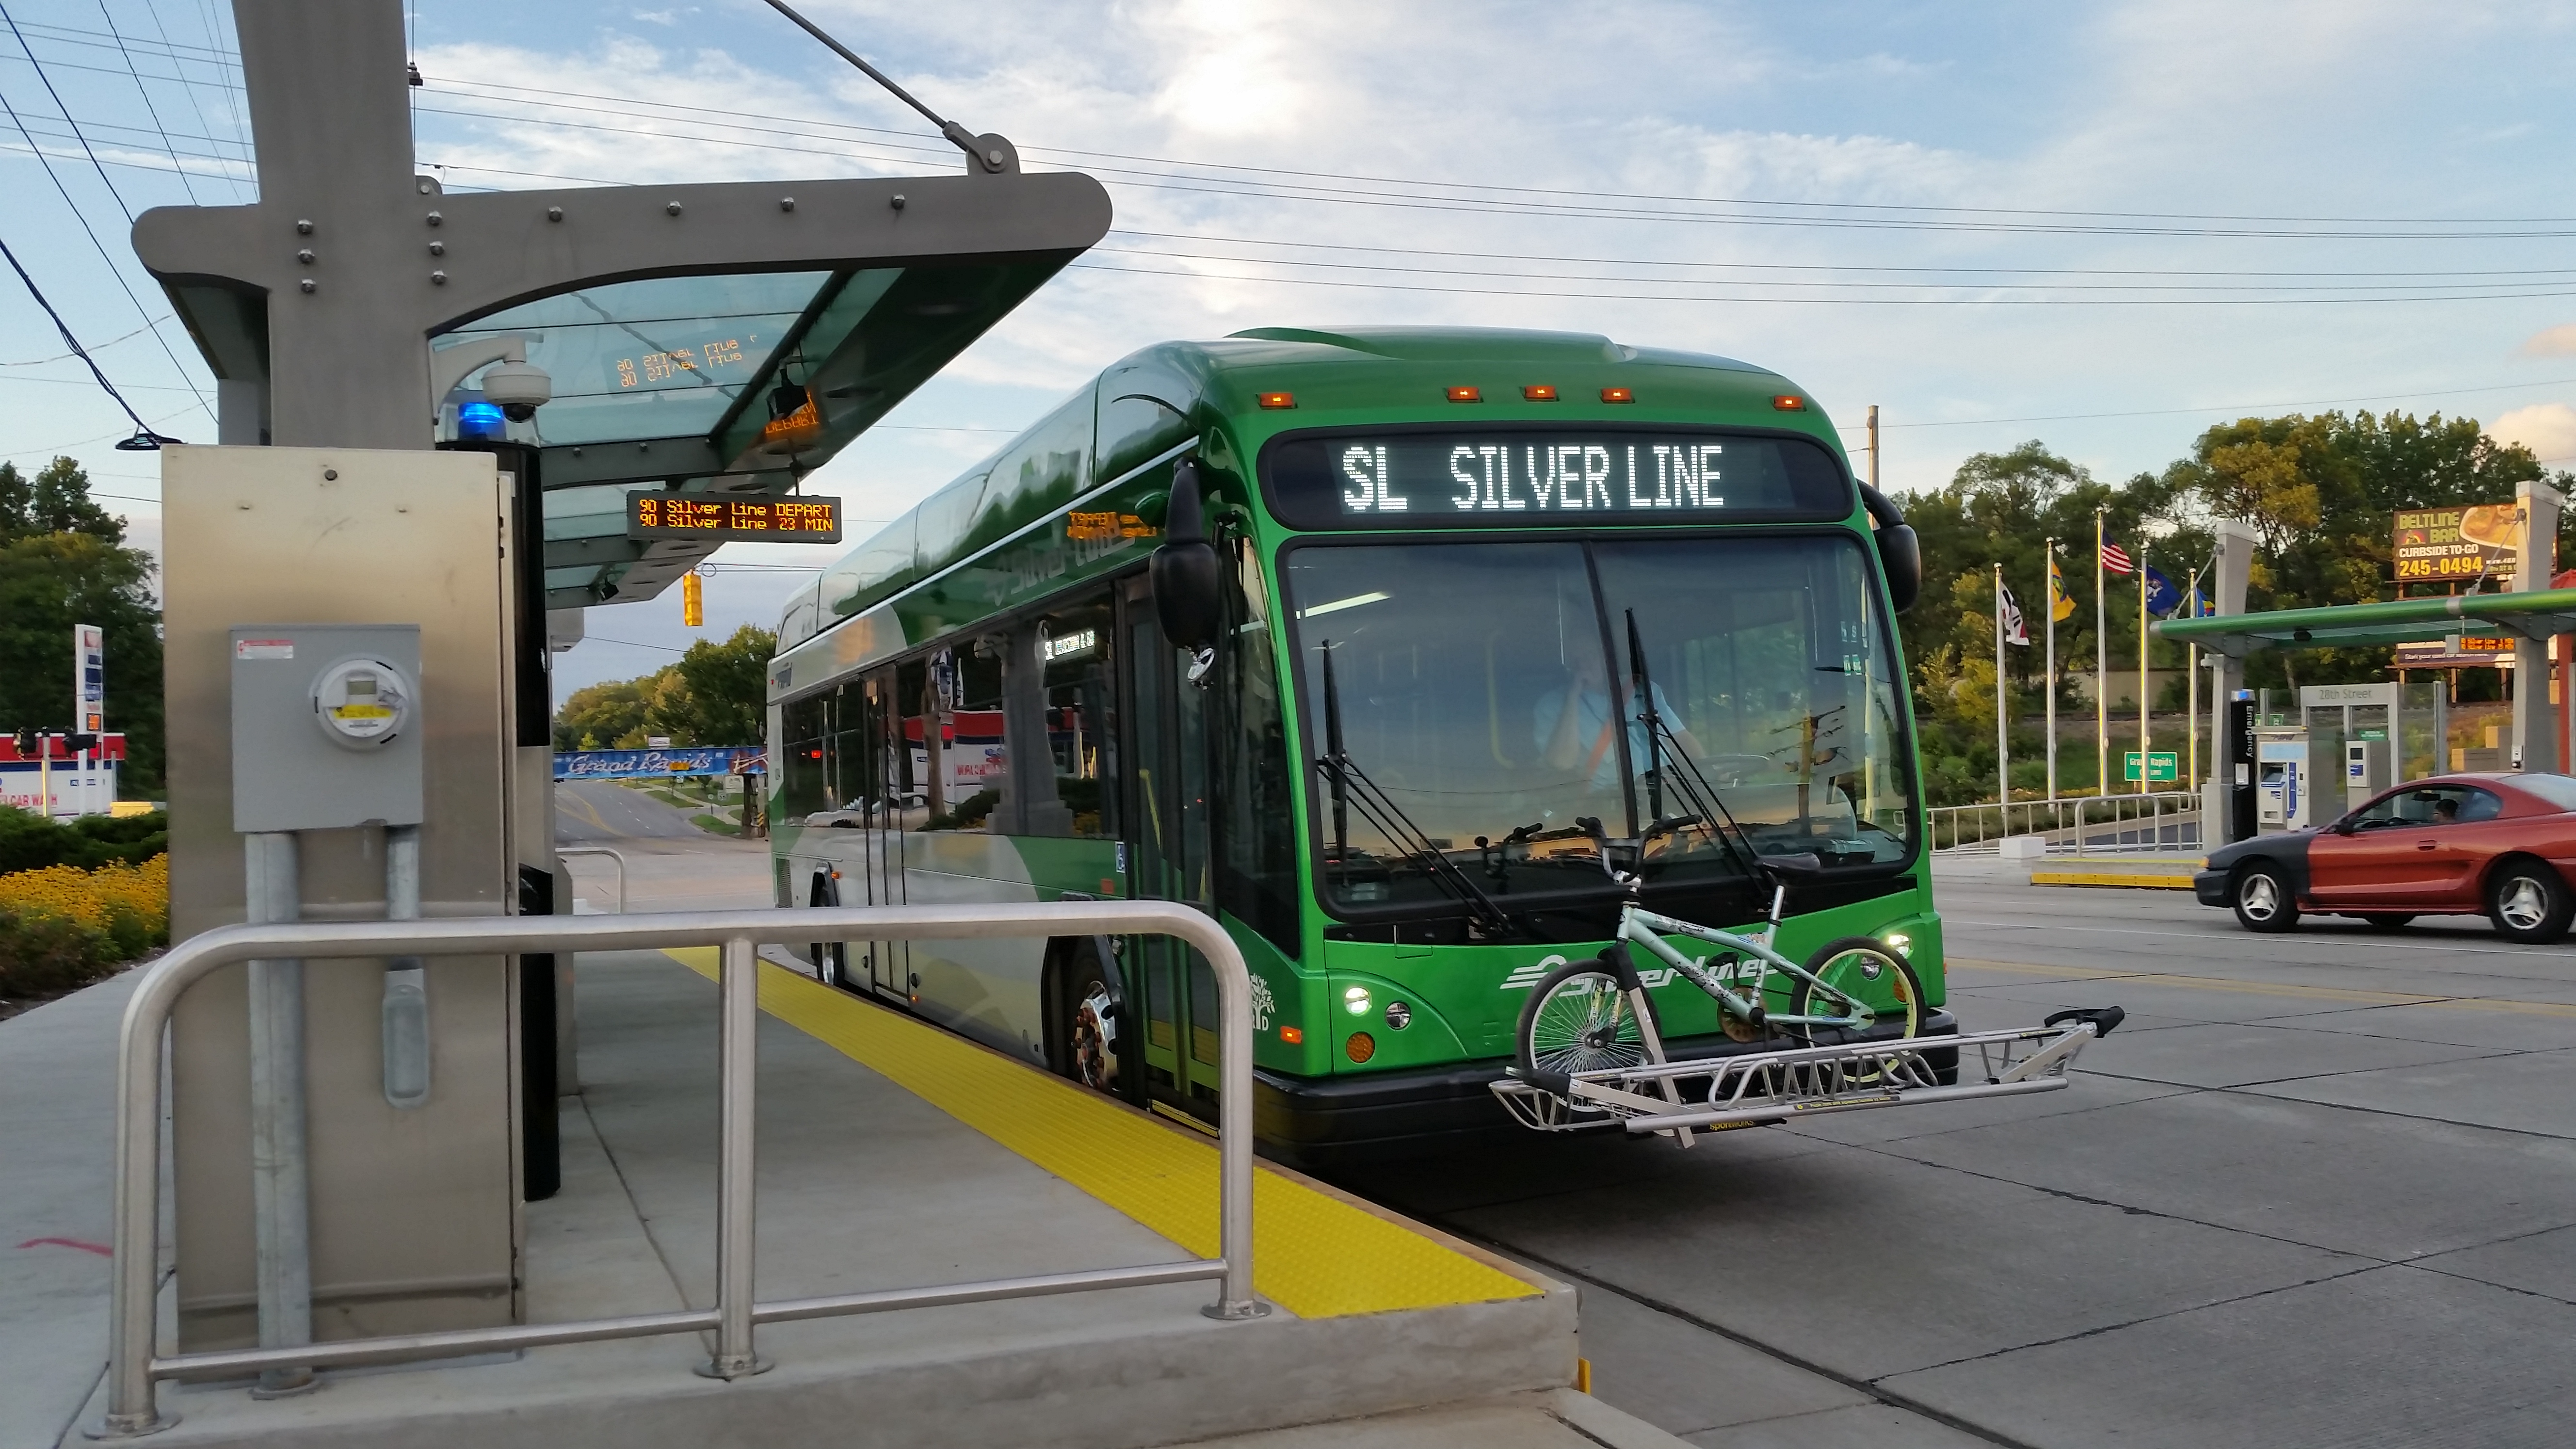 The Silver Line departing from a station.